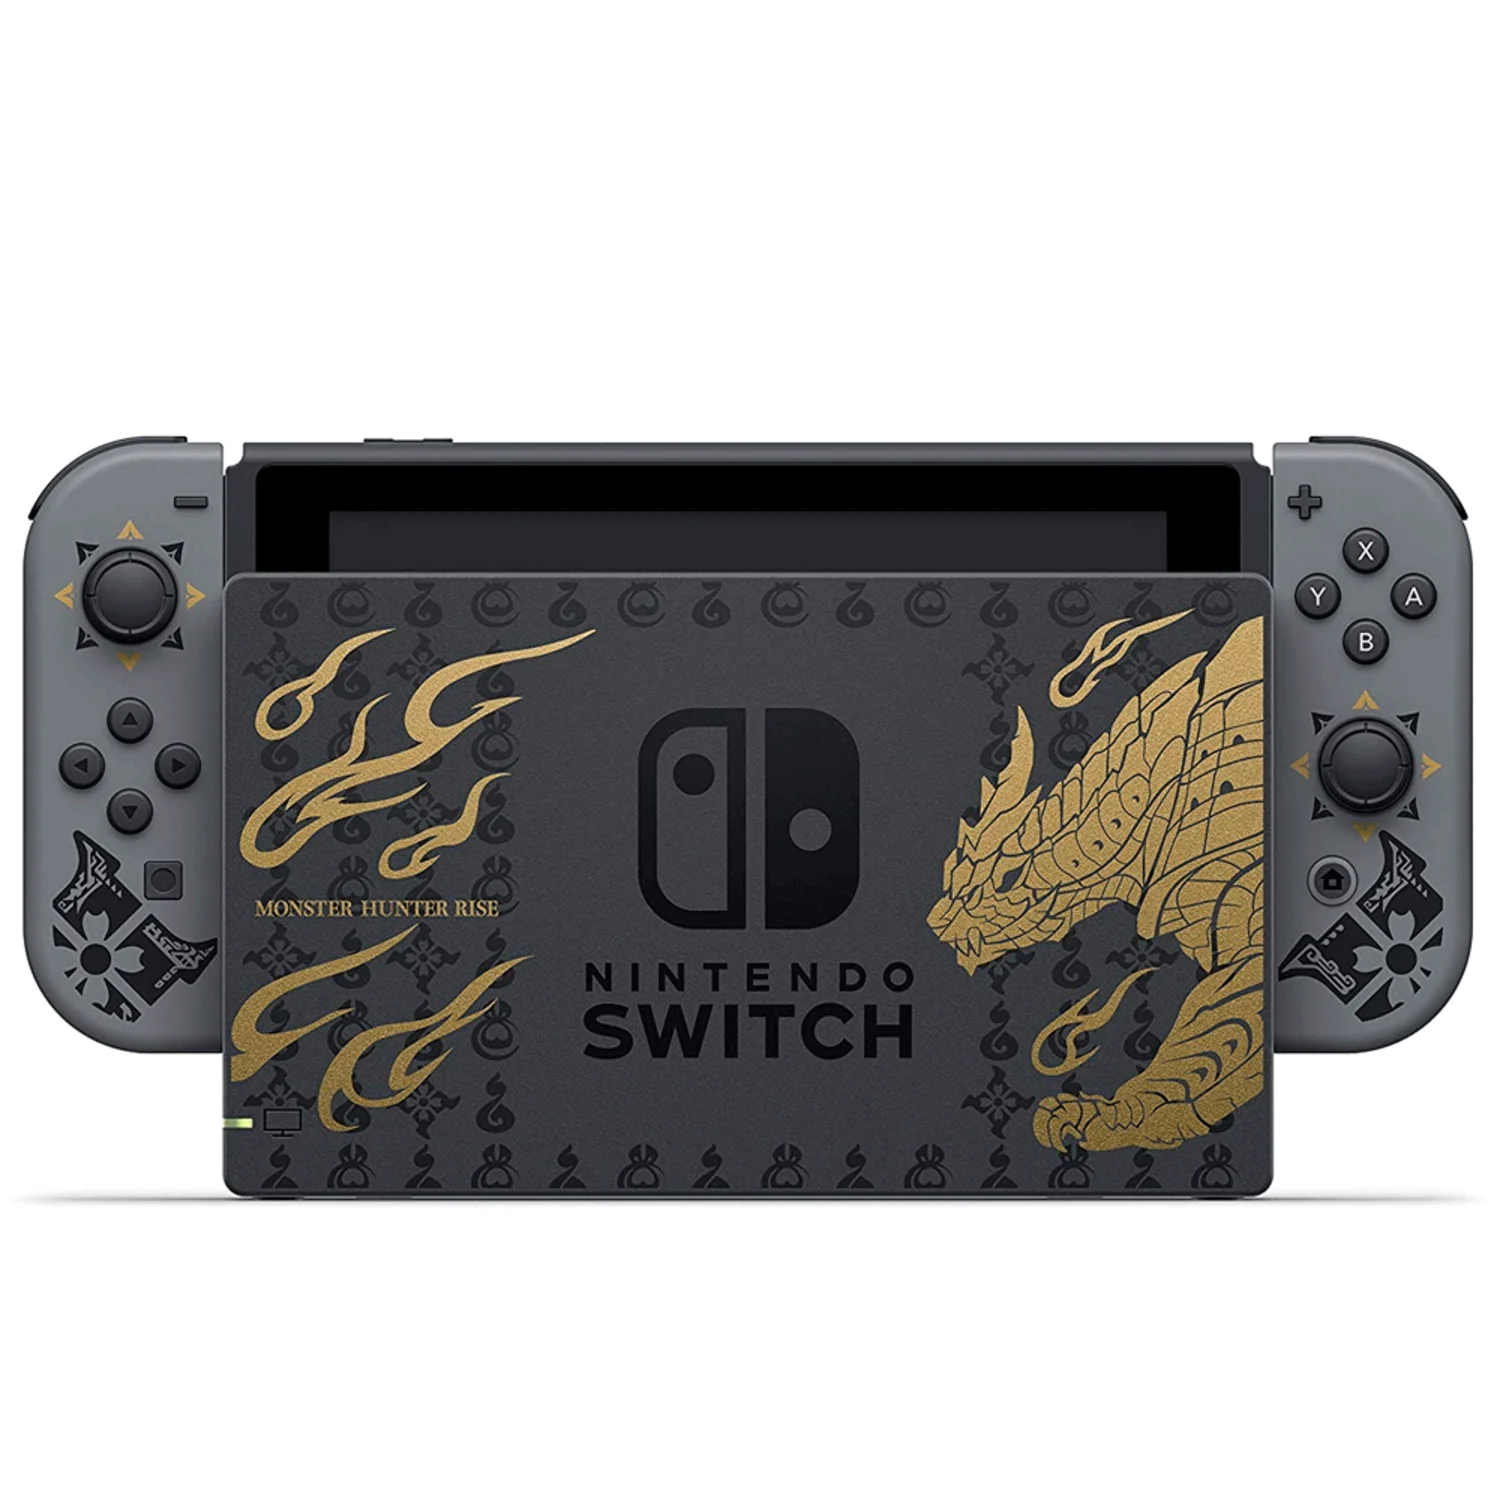 Console Nintendo Switch Monster Hunter Rise 32GB Japão - Cinza (HAD-S-KGALG)